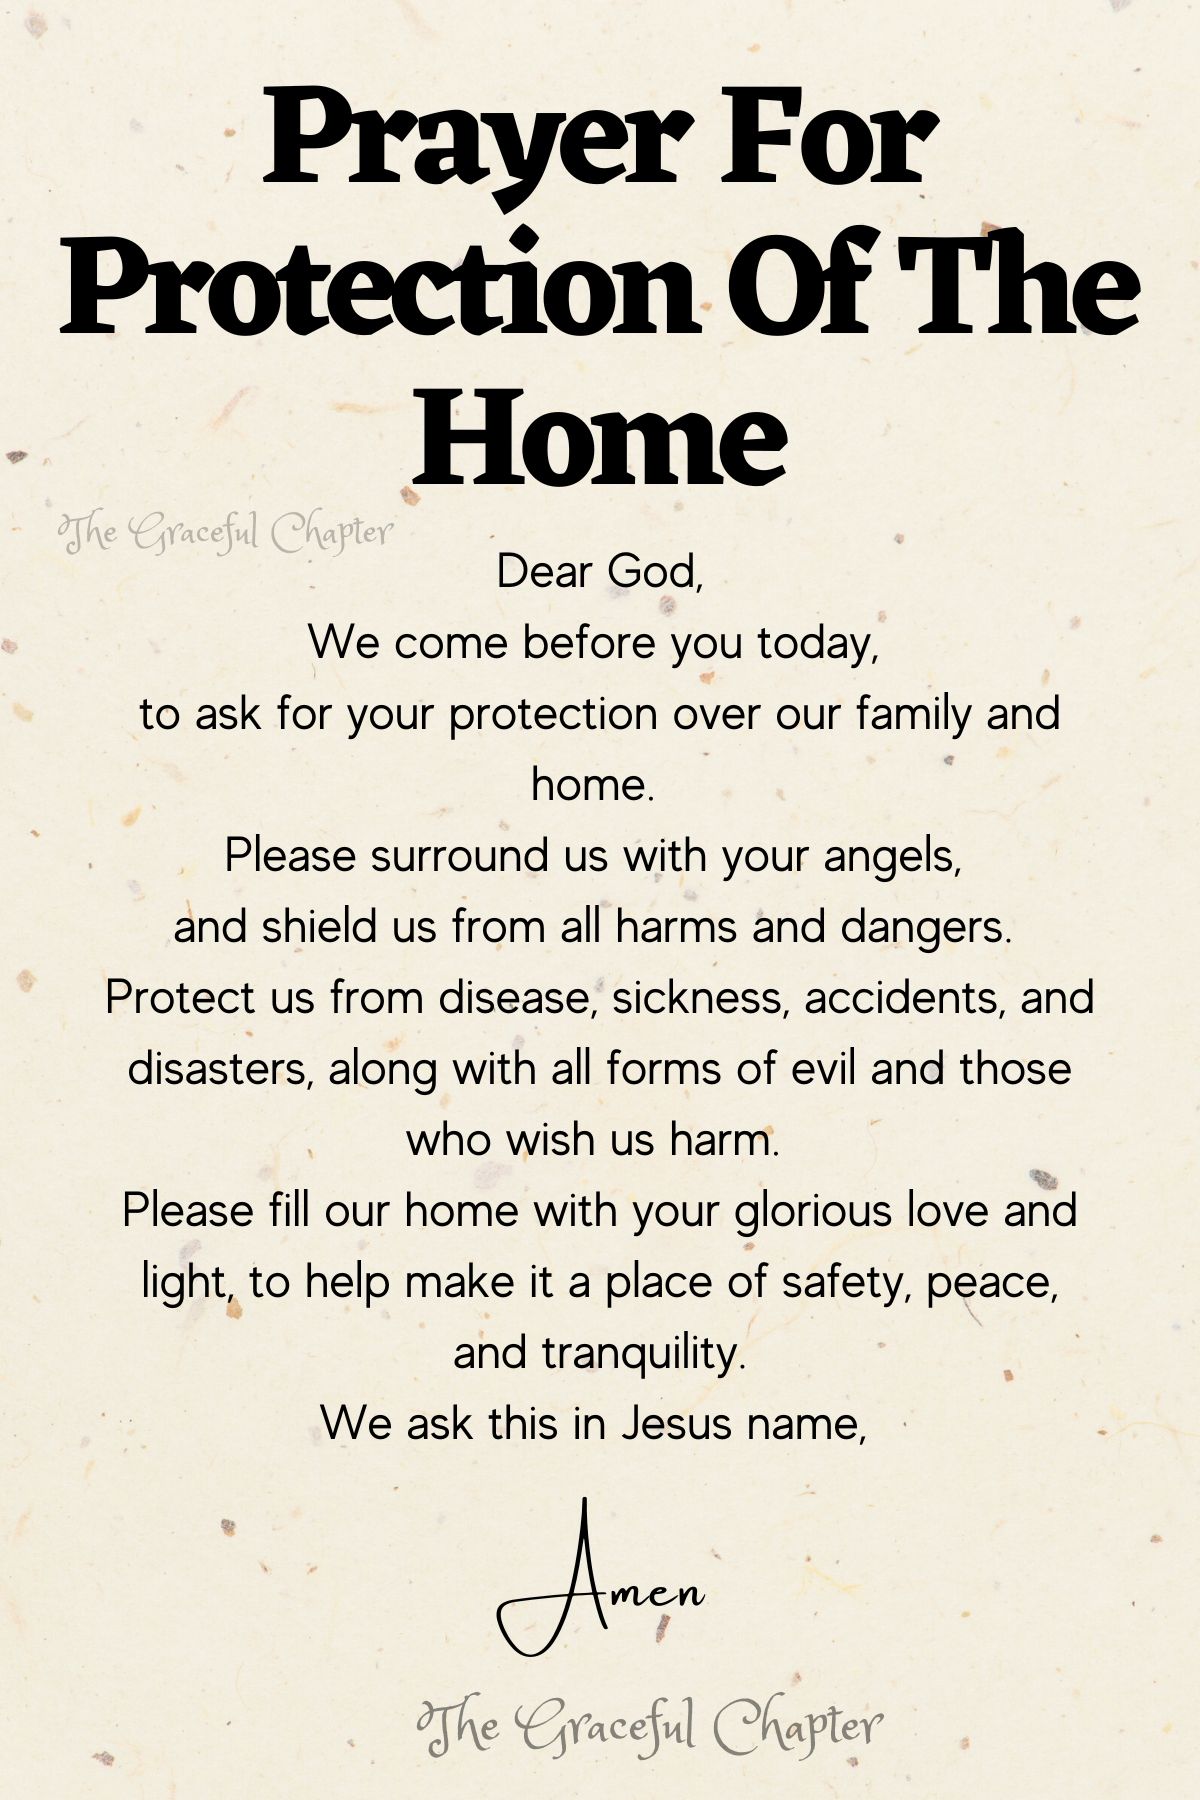 Prayer for protection of the home